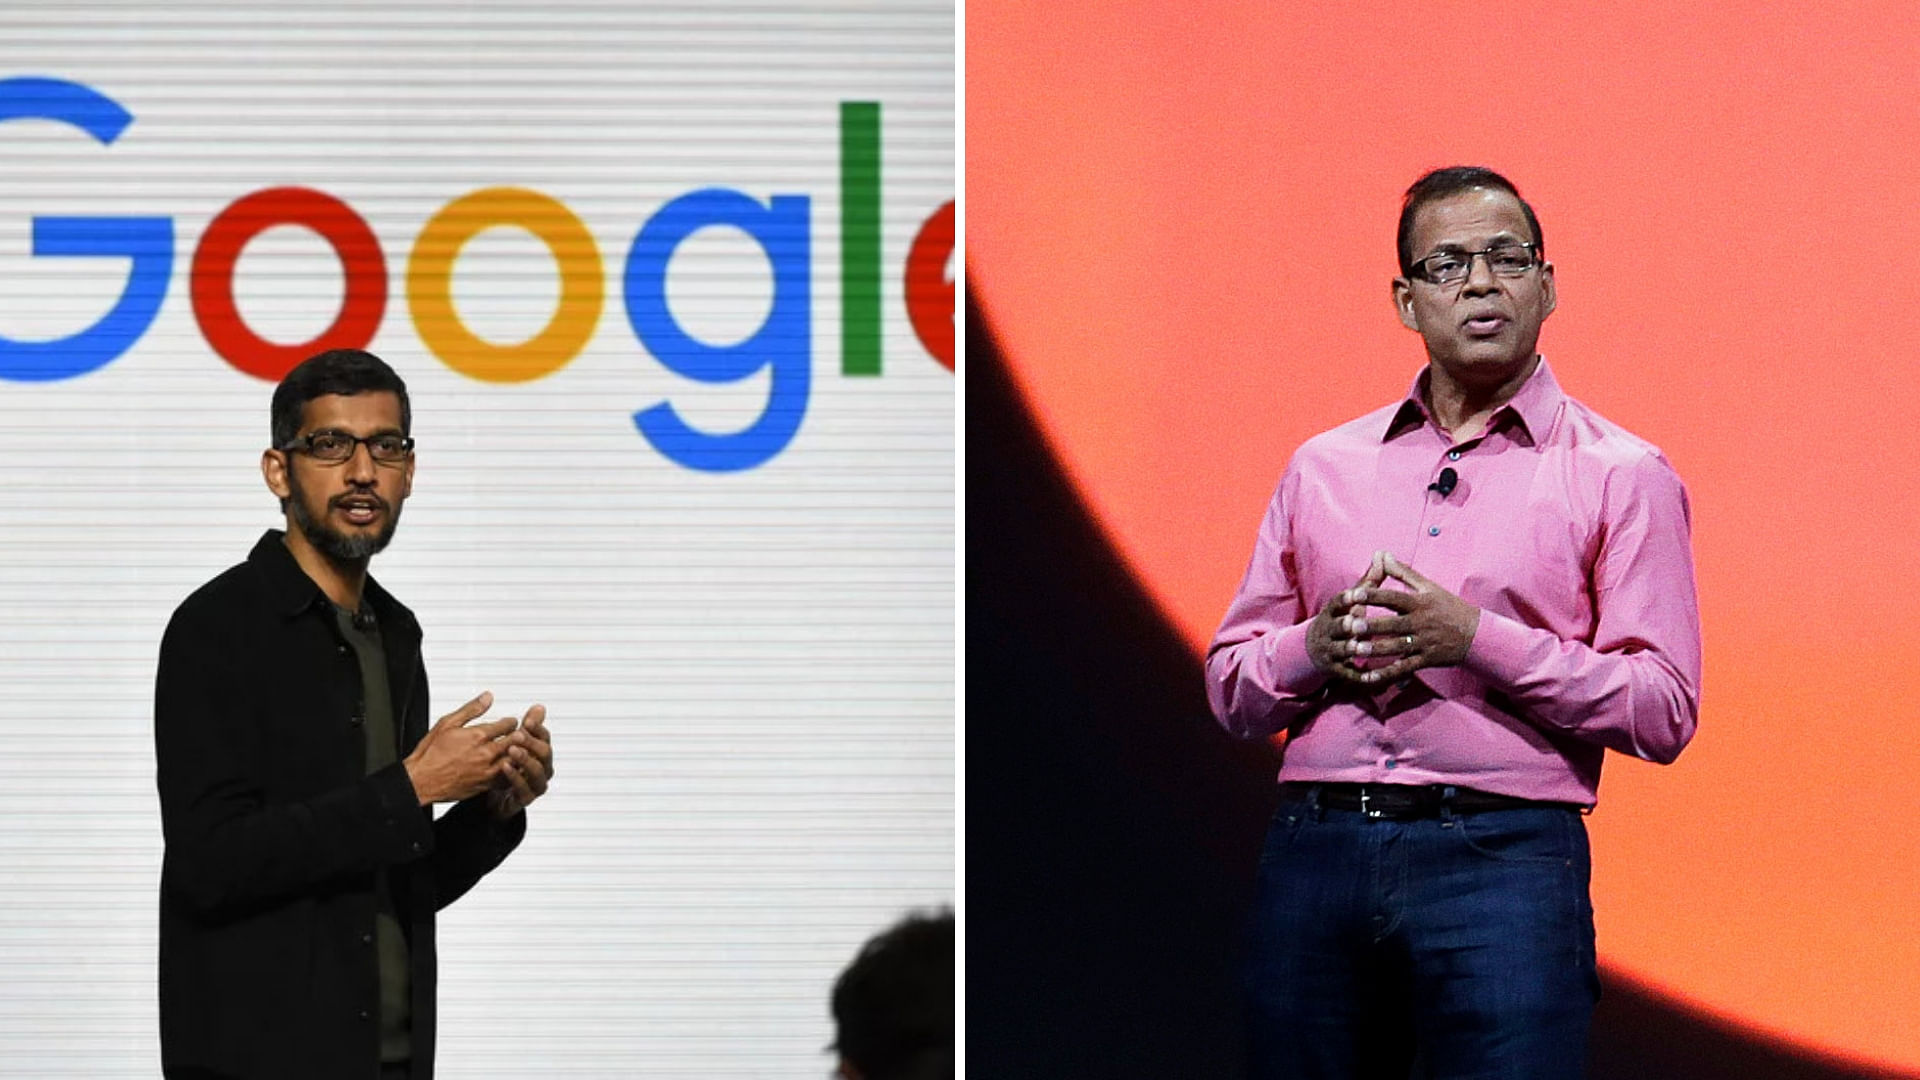 Google reportedly paid Indian-American executive Amit Singhal (right) $35 million in an exit package when he was reportedly forced to resign after a sexual assault investigation.